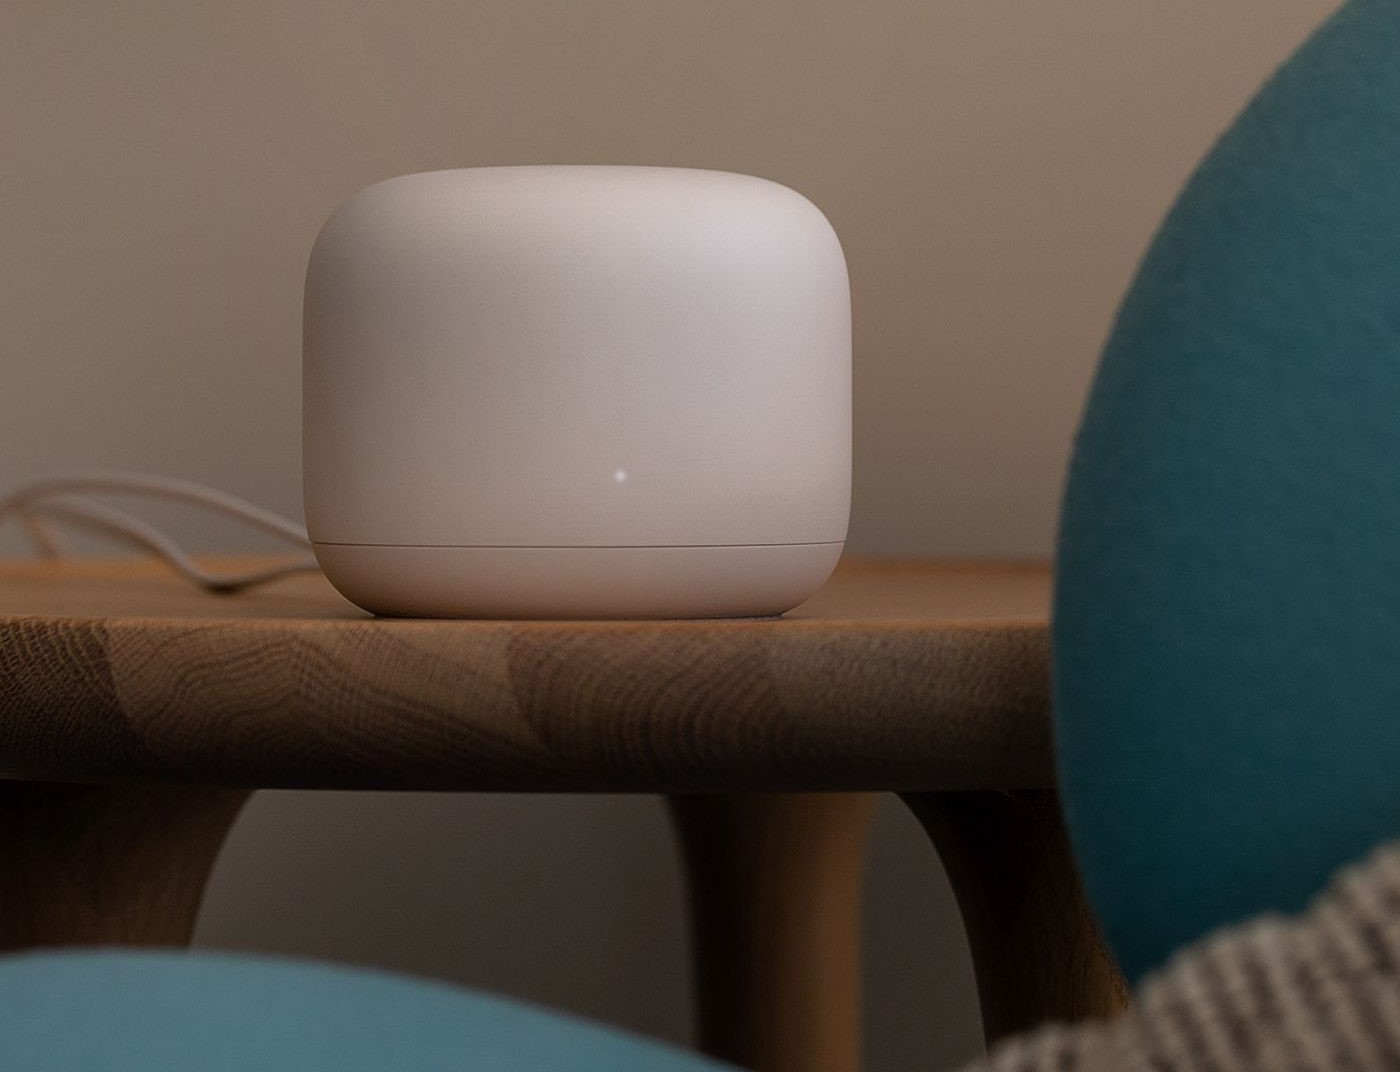 What Is A Google Nest Wi-Fi Router